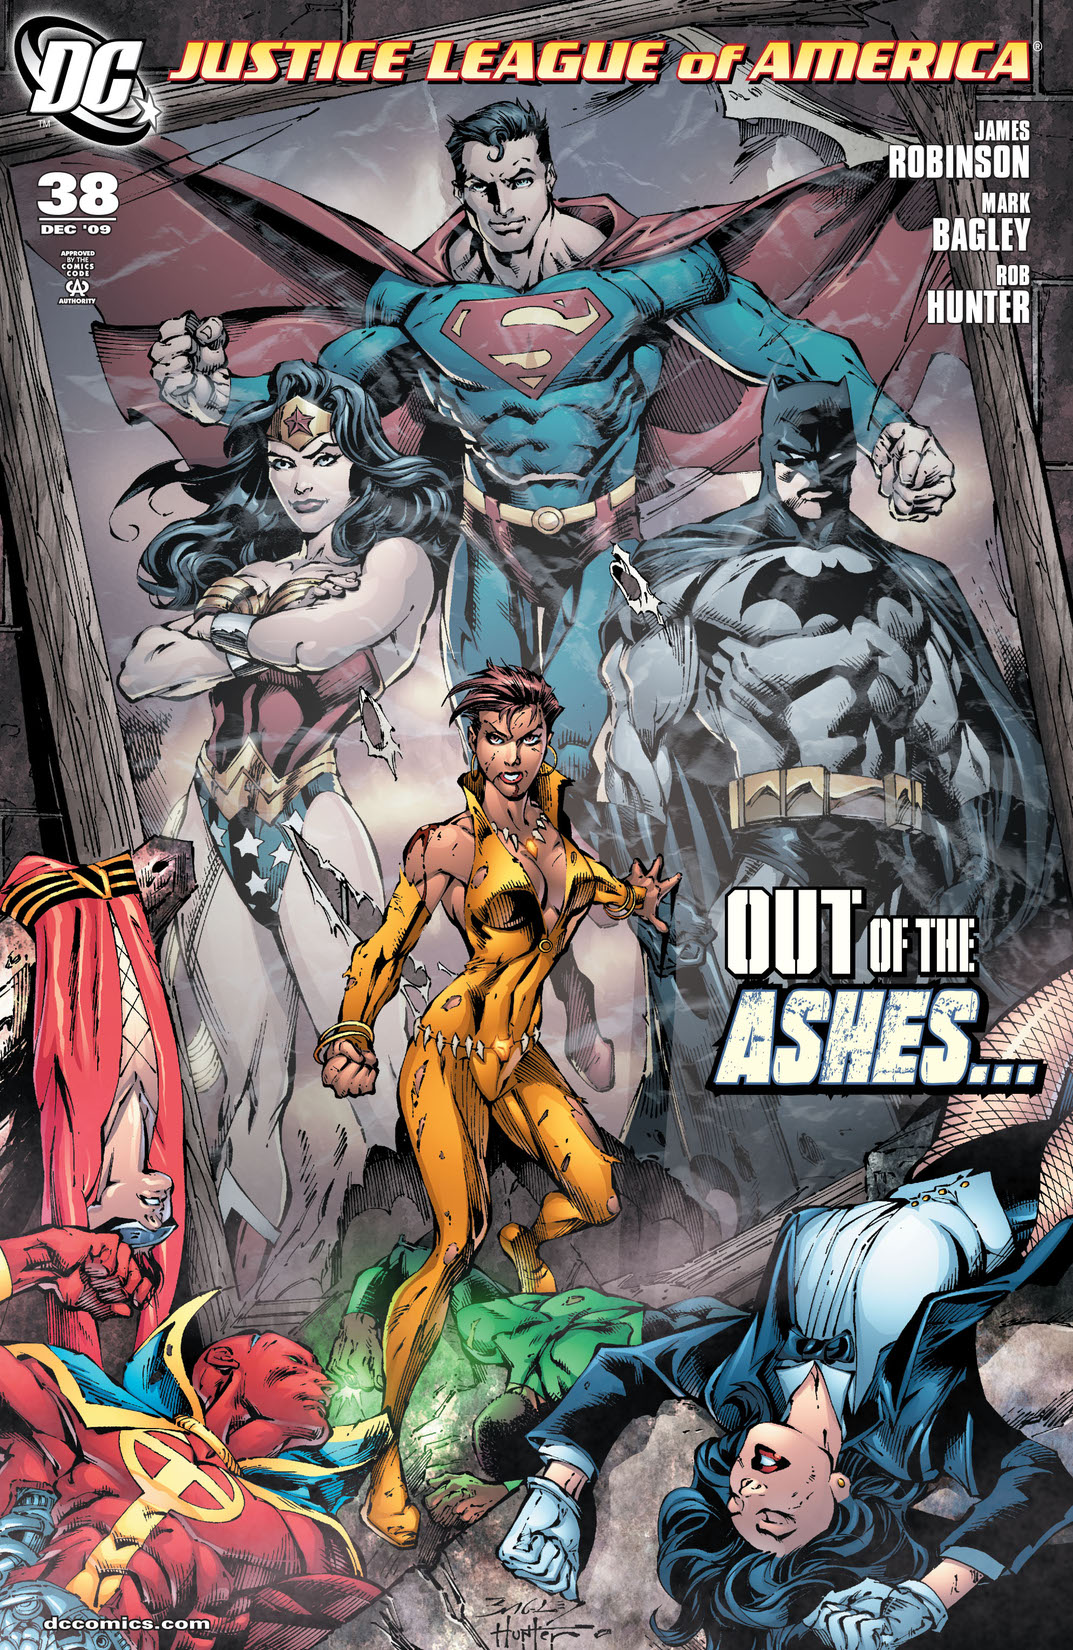 Justice League of America (2006-) #38 preview images